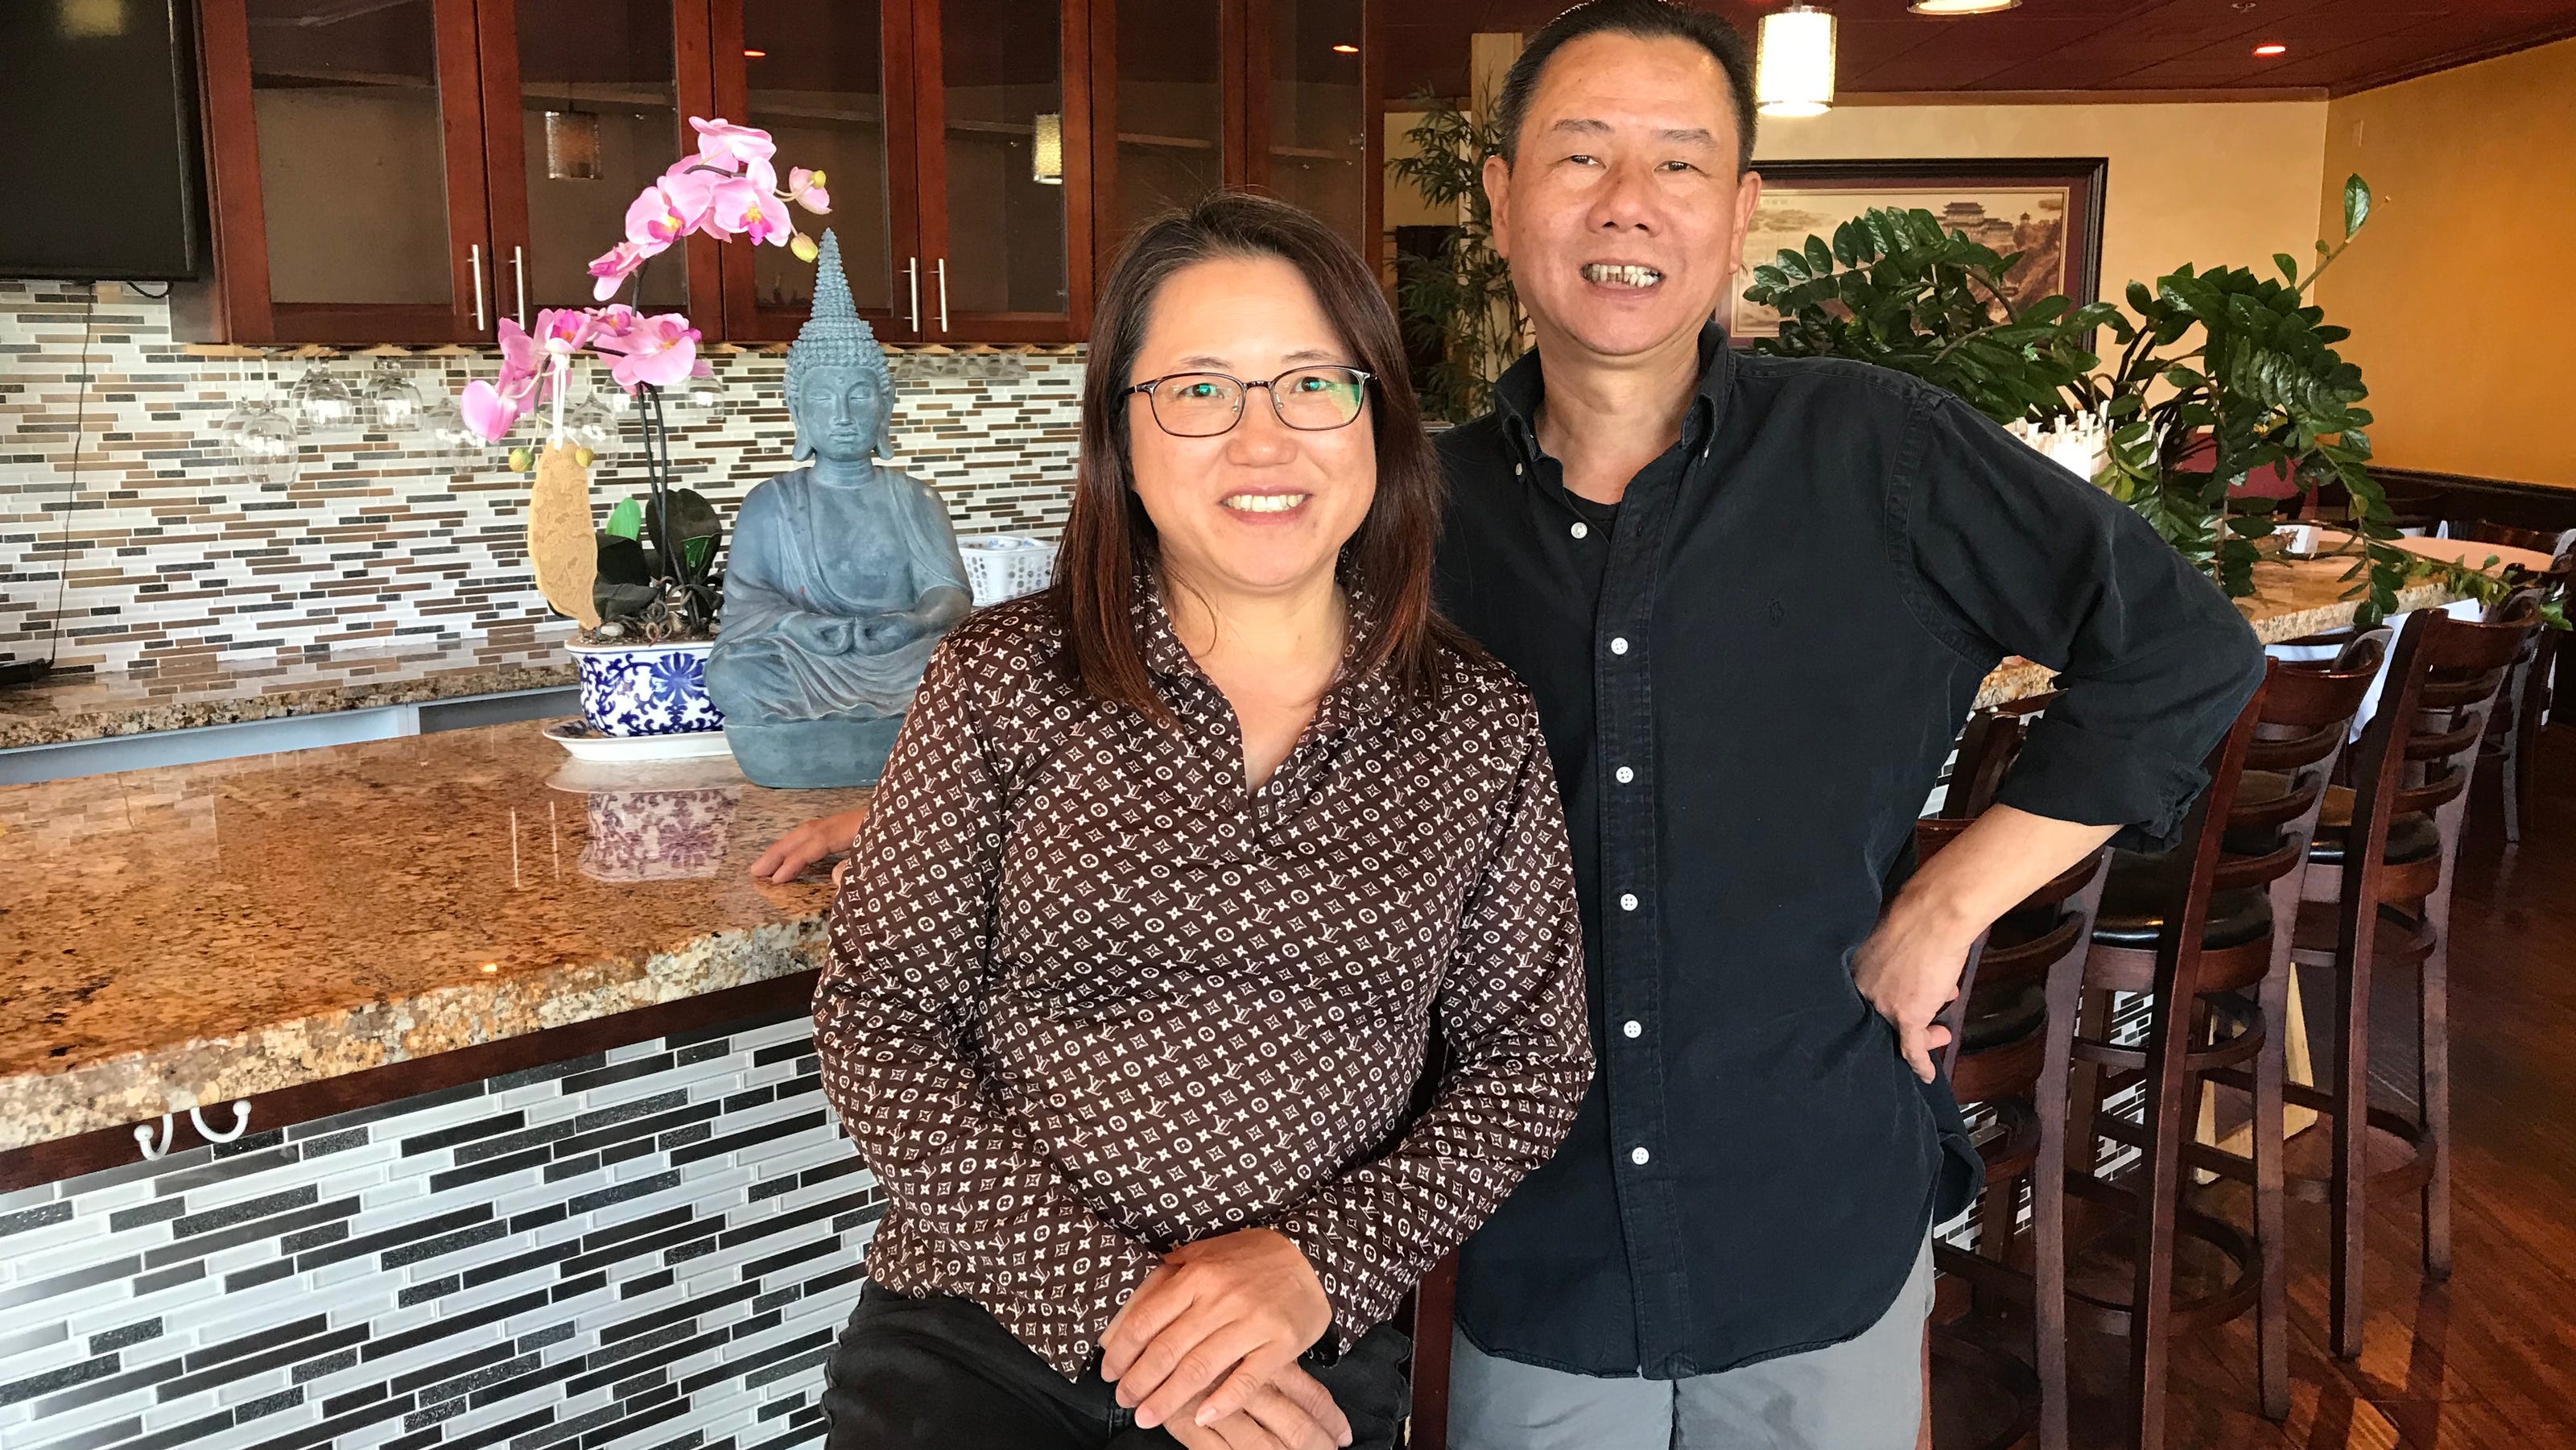 Two new Chinese restaurants opening in Reno, first dimsum only spot